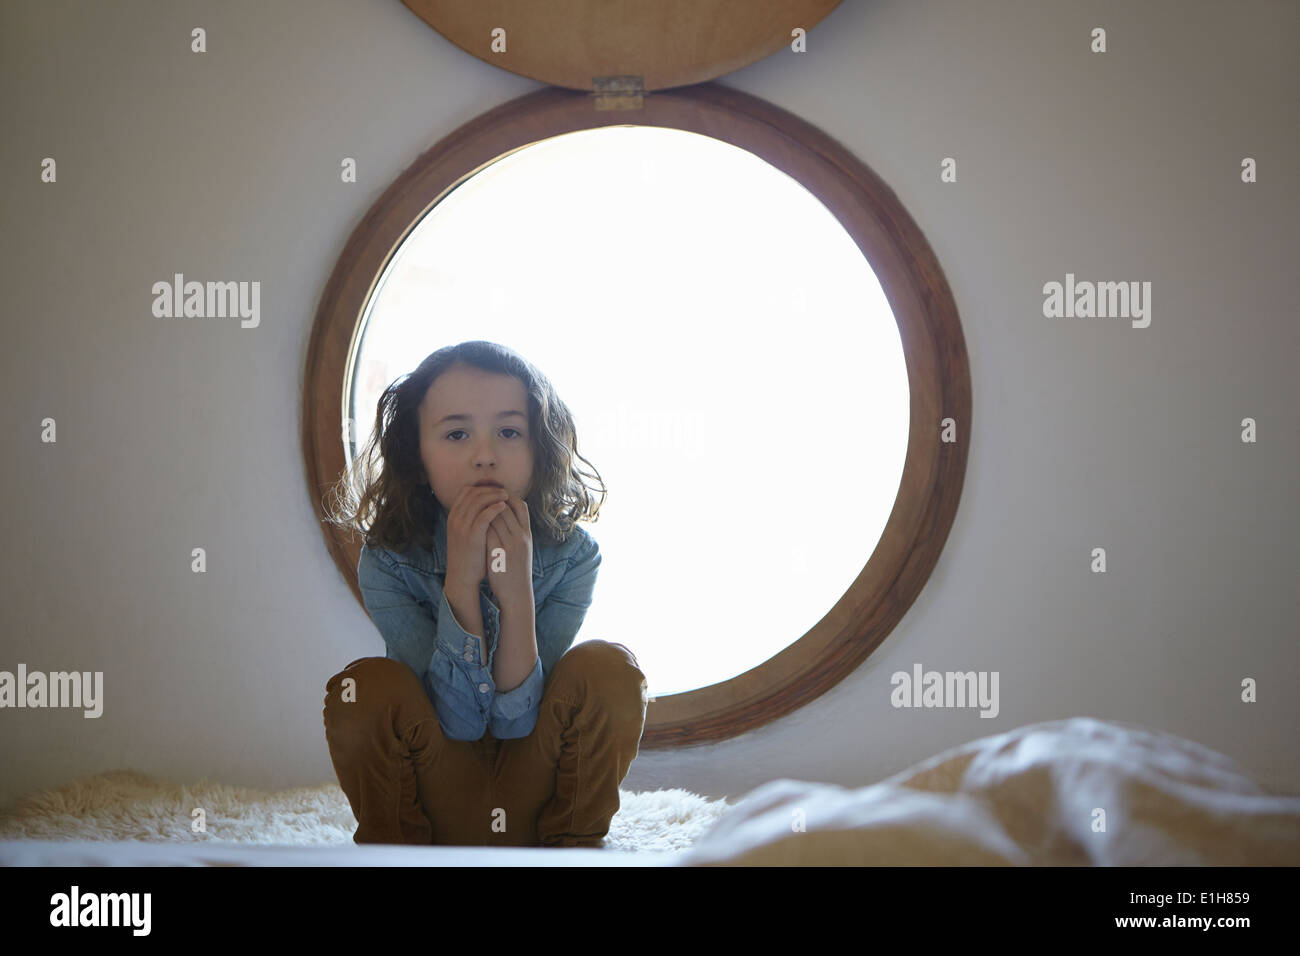 Portrait of sullen girl crouching in front of circular window Stock Photo